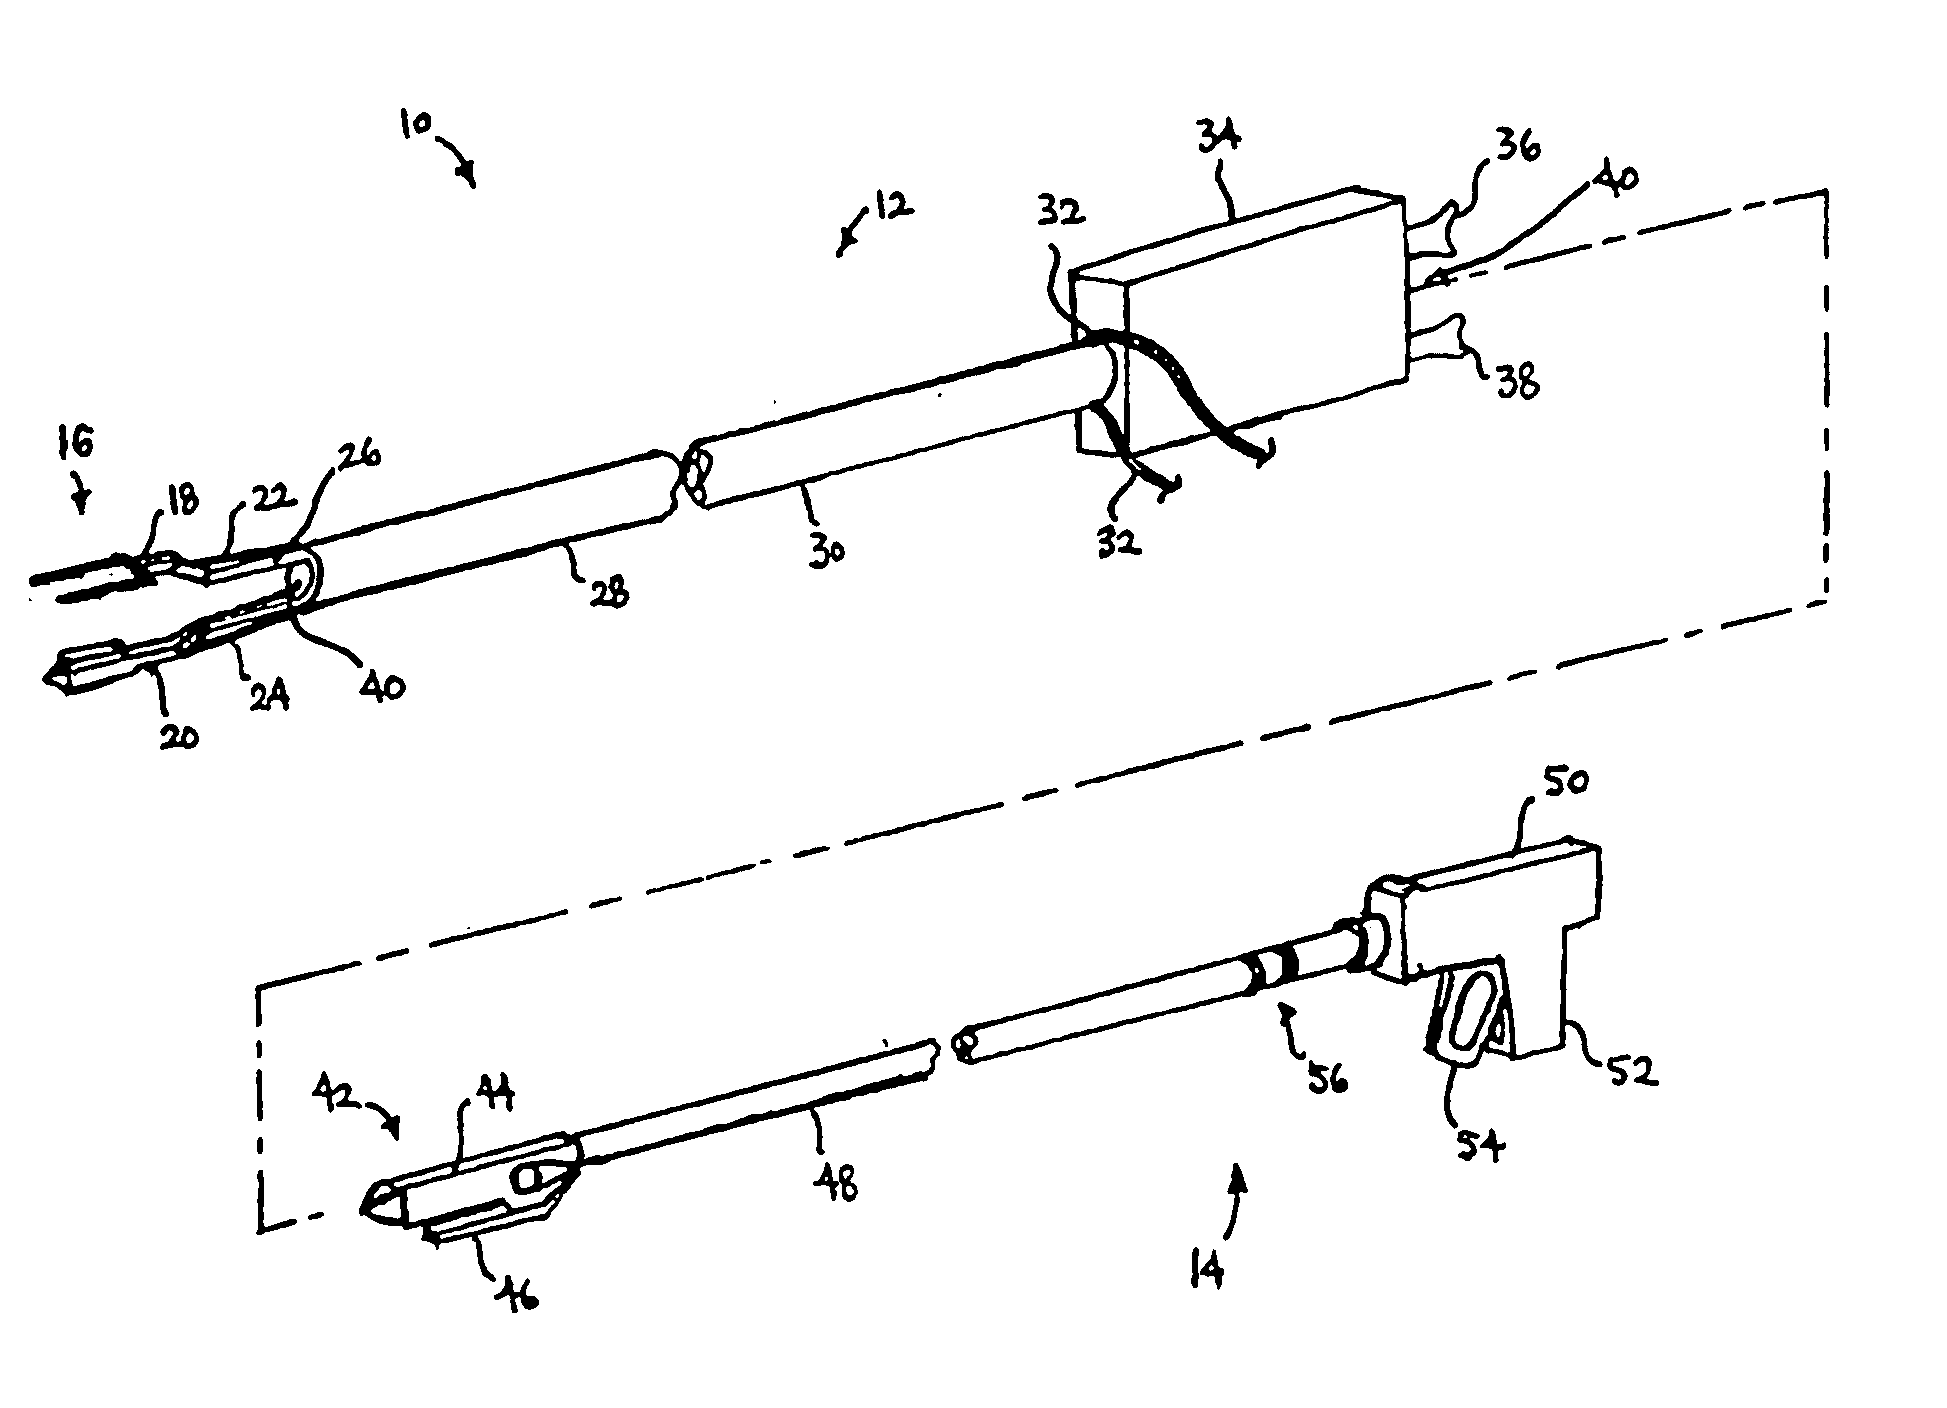 Single-fold system for tissue approximation and fixation